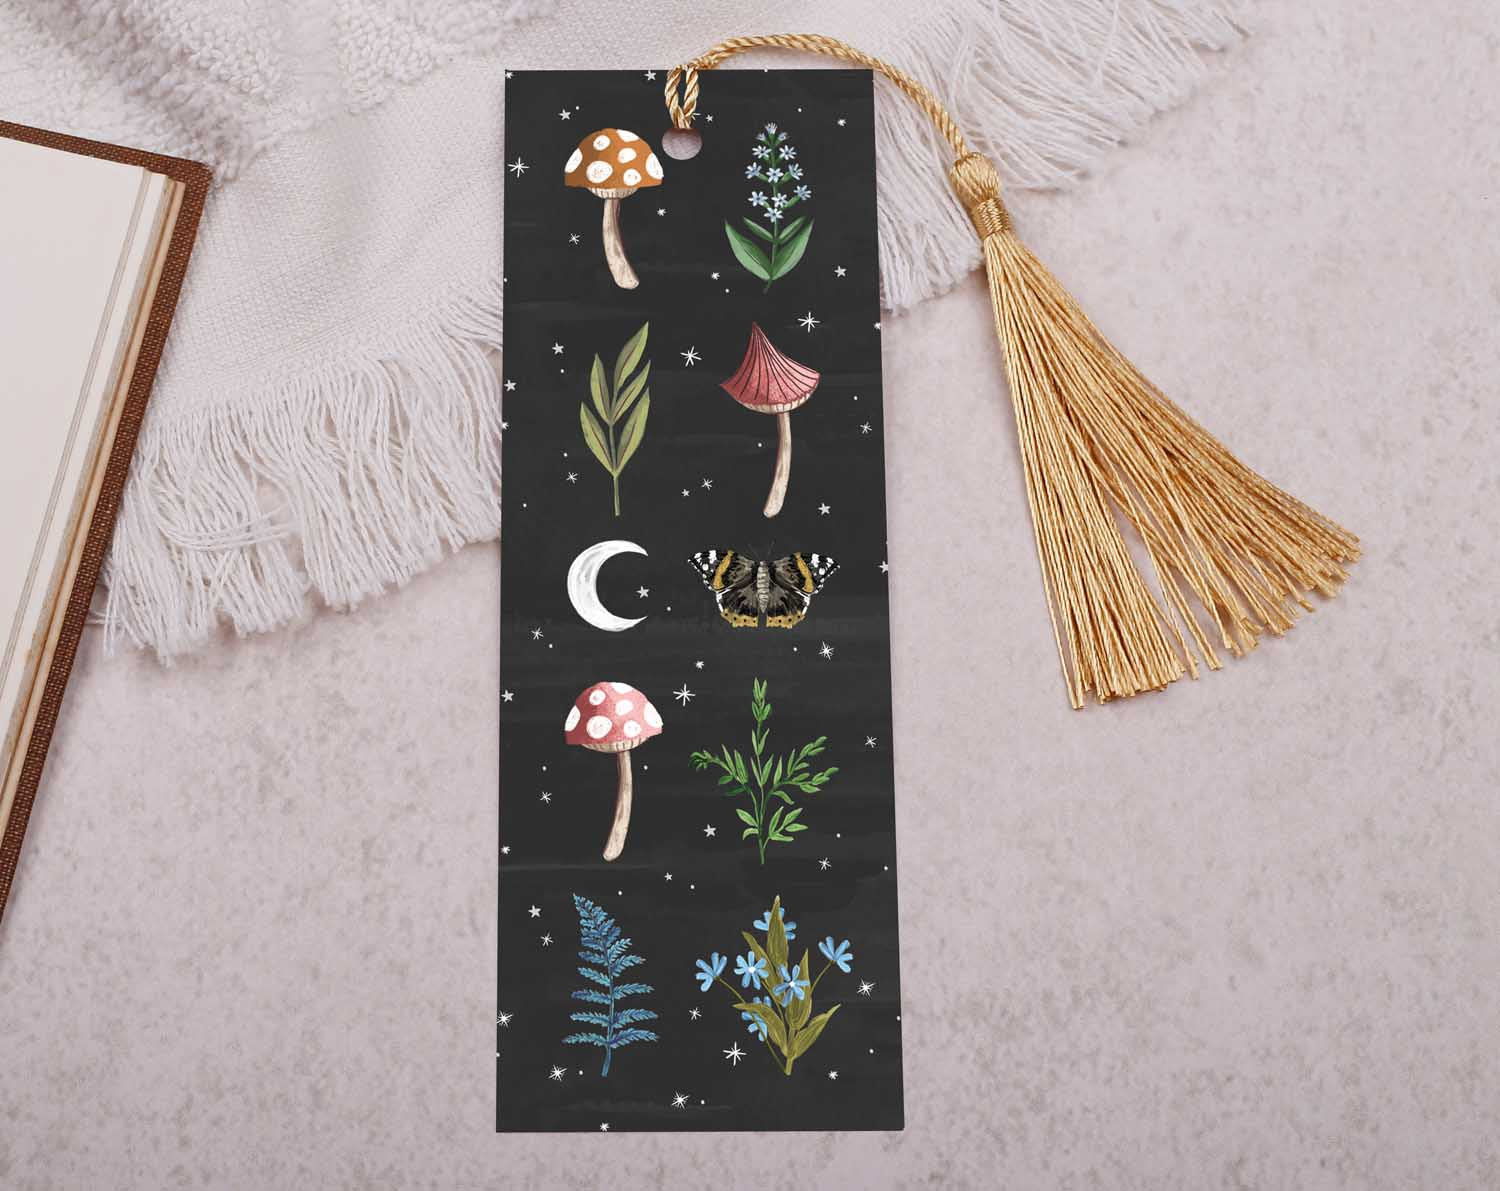 This beautiful paper bookmark is double sided. The main side features a celestial witchy pattern featuring the moon, ferns and mushrooms whilst the flip side shows a complimentary Beetlejuice monochrome pattern